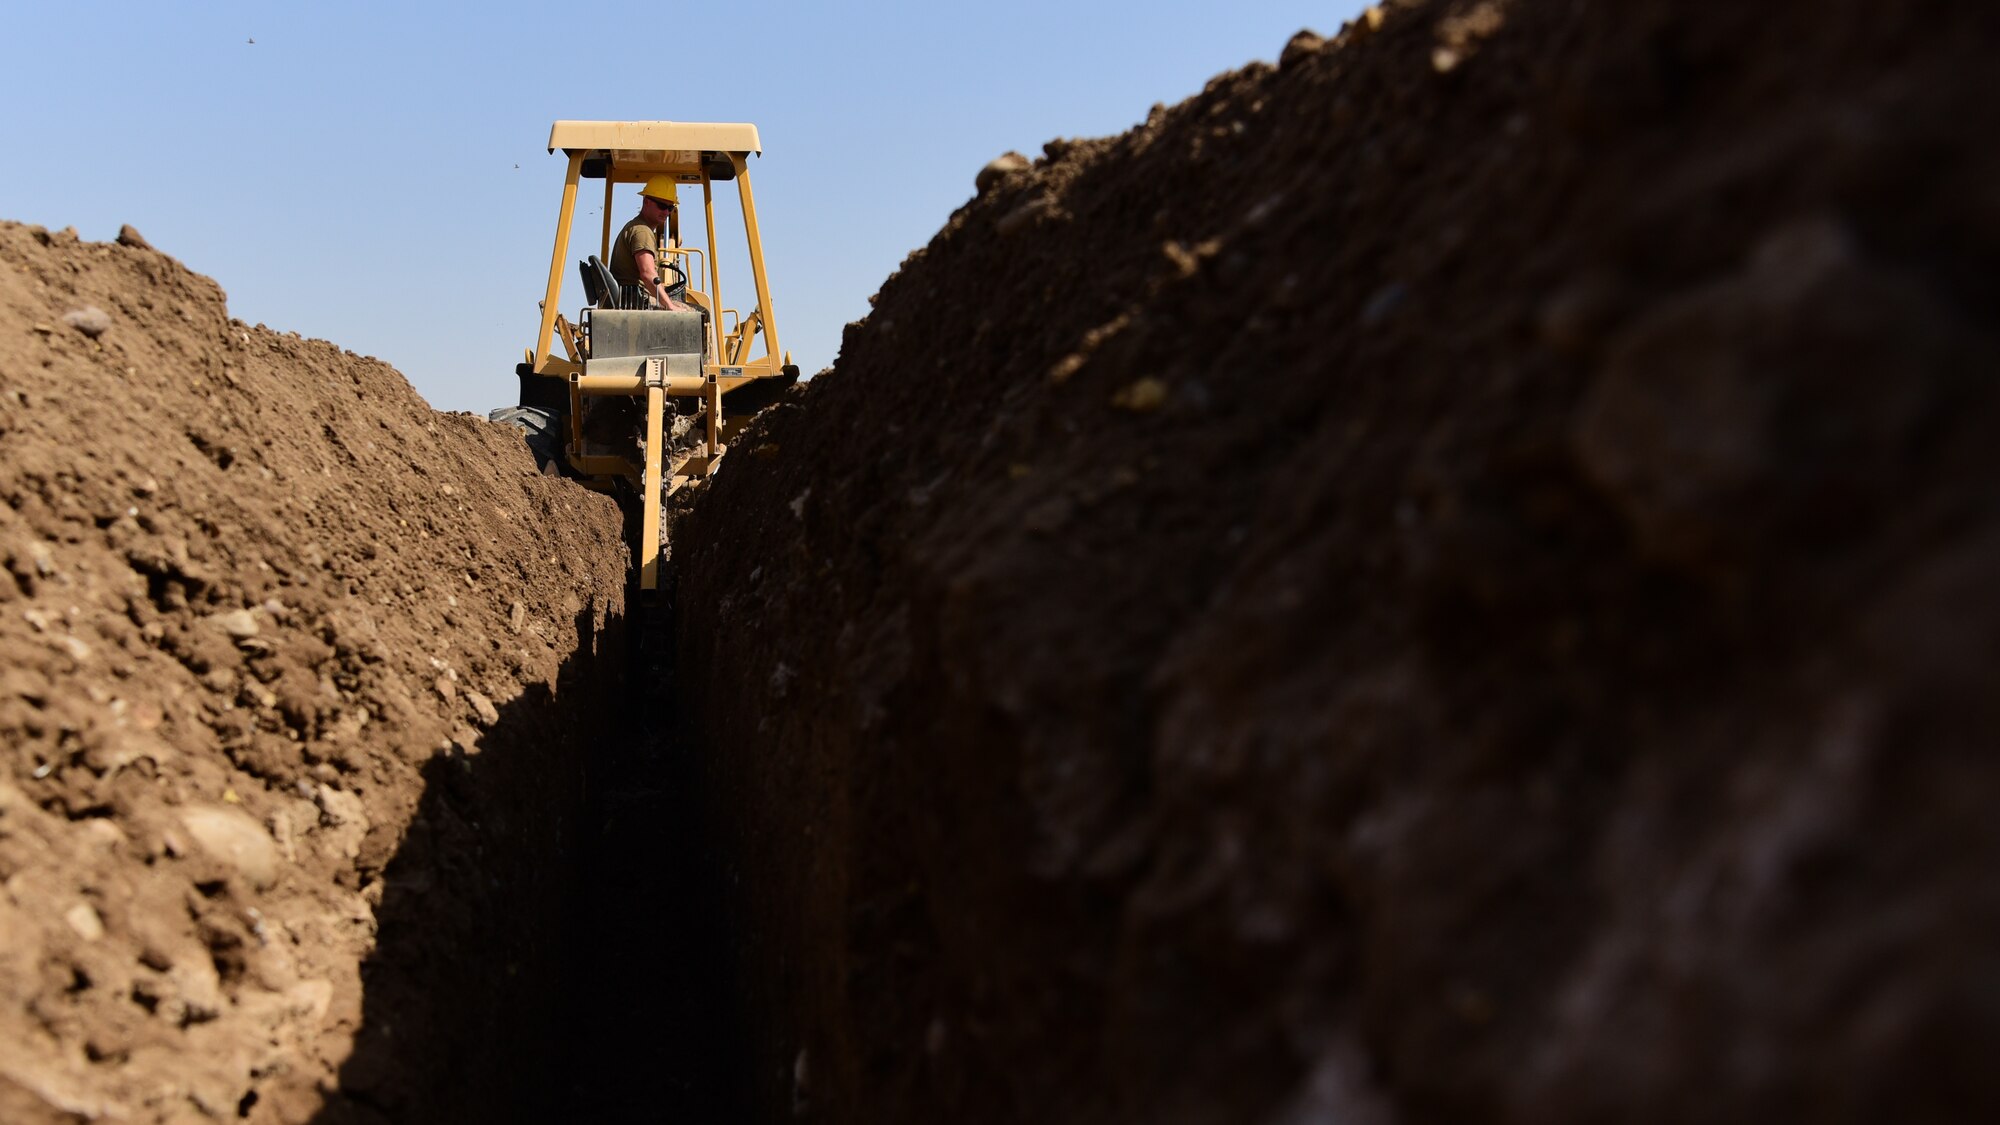 U.S. Air Force Tech. Sgt. Doug Haveman, Air Force Engineering and Installation, Iraq team chief, digs a trench Aug. 28, 2018, at Camp Taji, Iraq. Haveman manages a team of engineers who help create the network systems throughout the Combined Task Force – Operation Inherent Resolve Area of Responsibility. (U.S. Air Force photo by Staff Sgt. Christopher Stoltz)